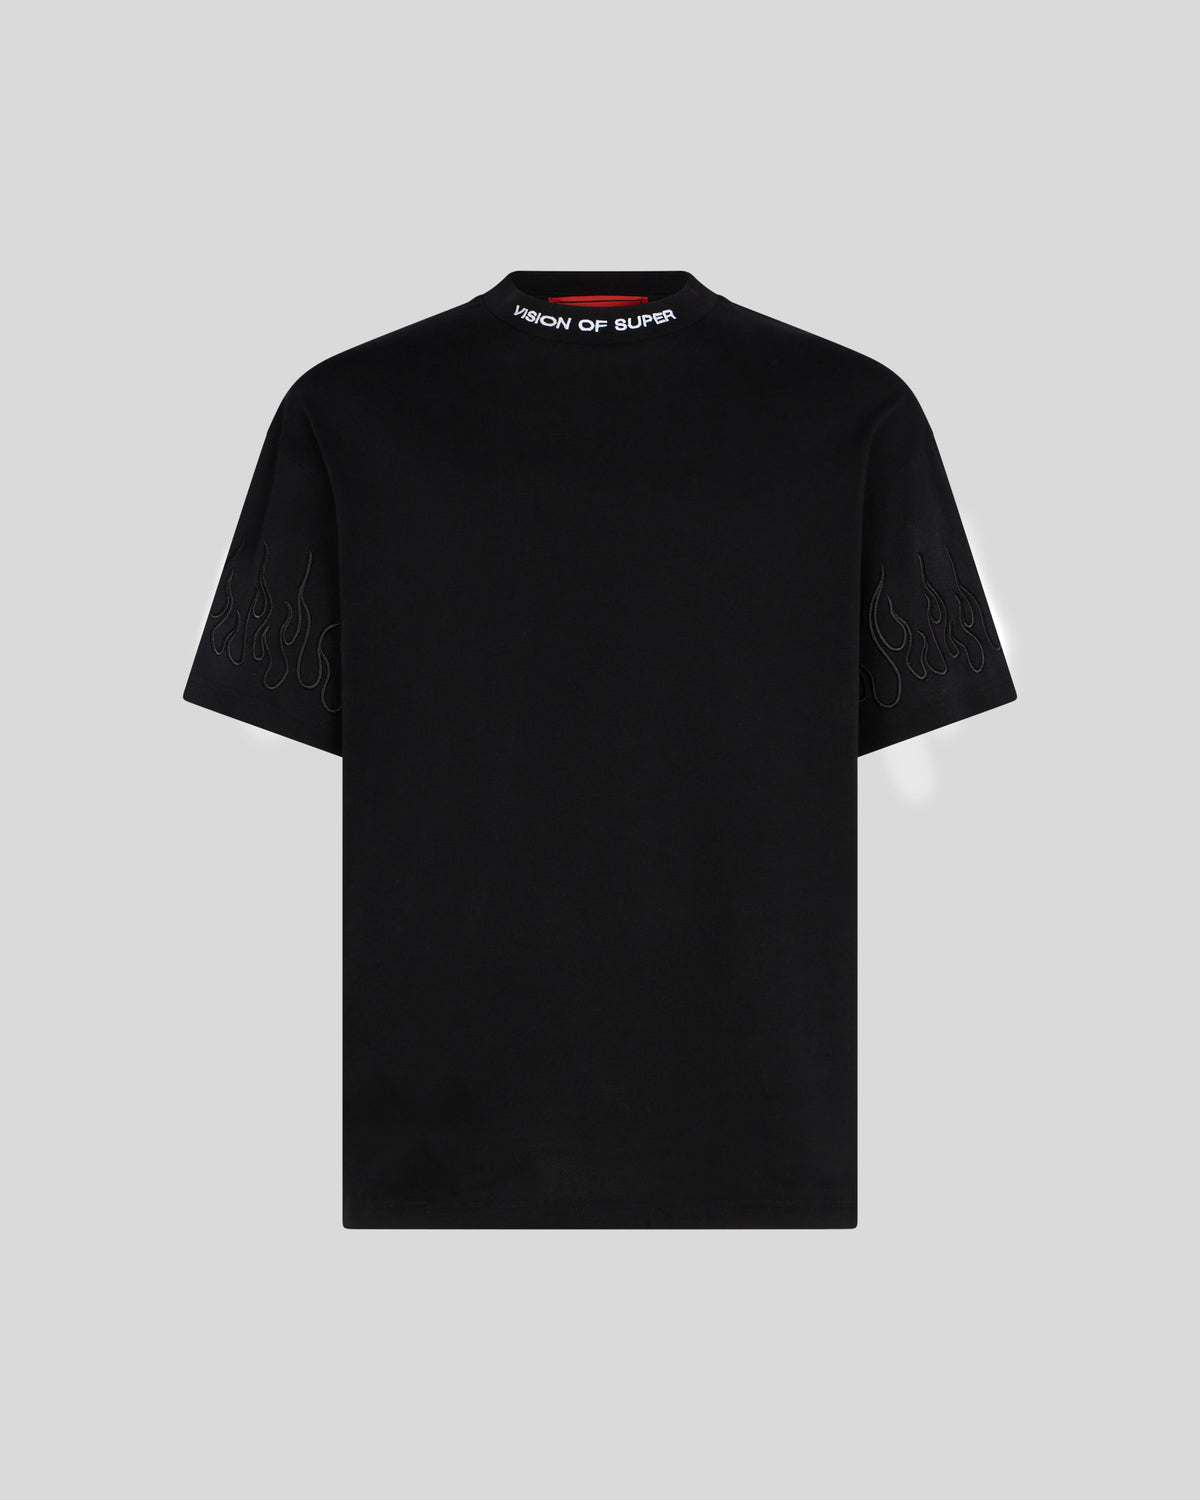 VISION OF SUPER BLACK T-SHIRT WITH BLACK FLAMES